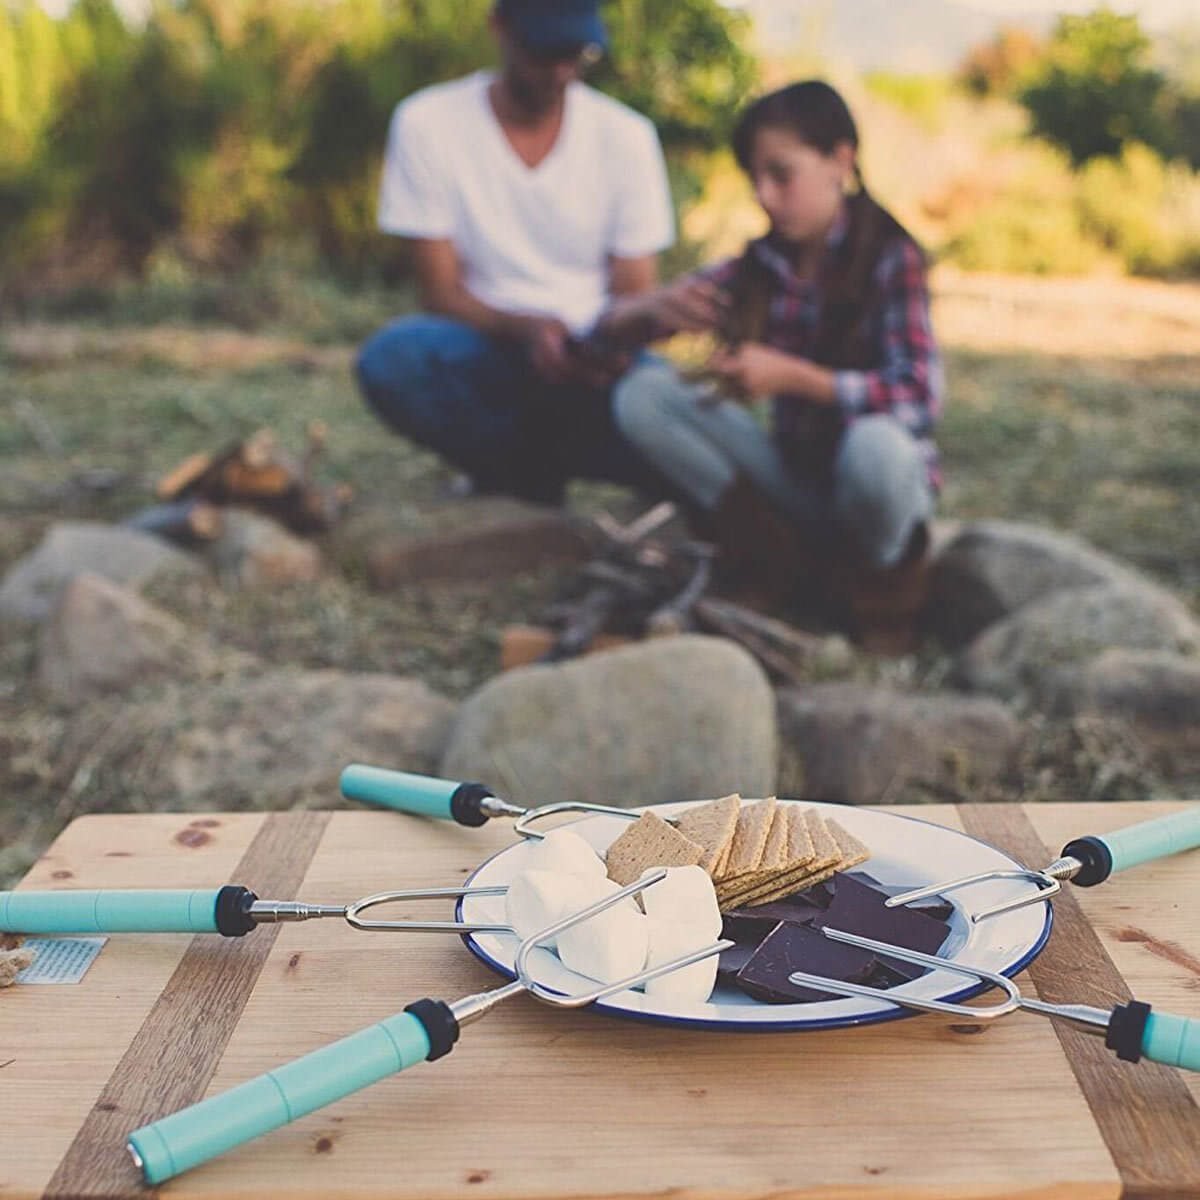 15 Amazing Camping Gadgets Found on Amazon